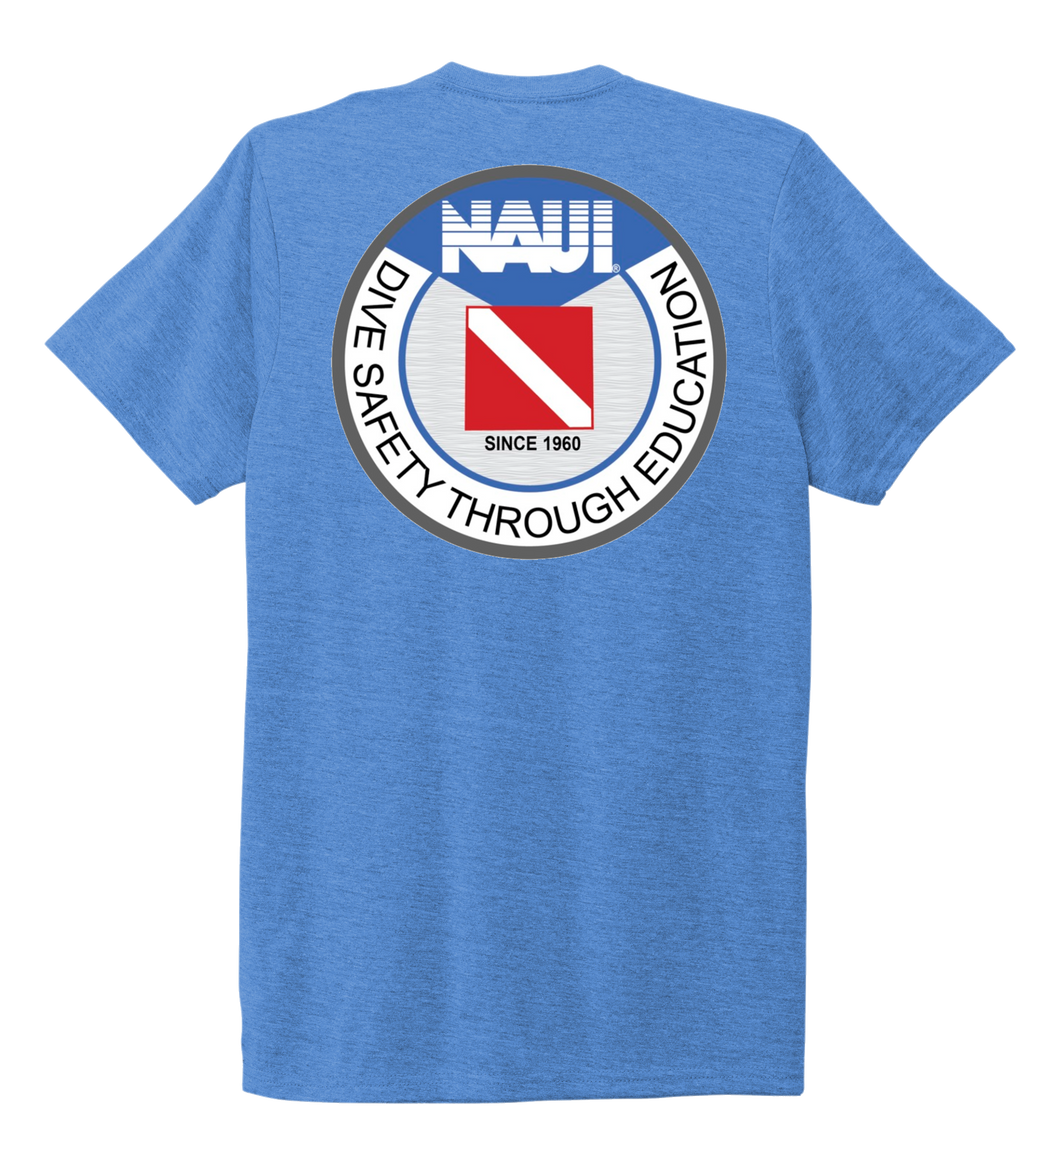 Naui Dive Safety Through Education, Unisex Crew Neck T-shirt in Sky Blue